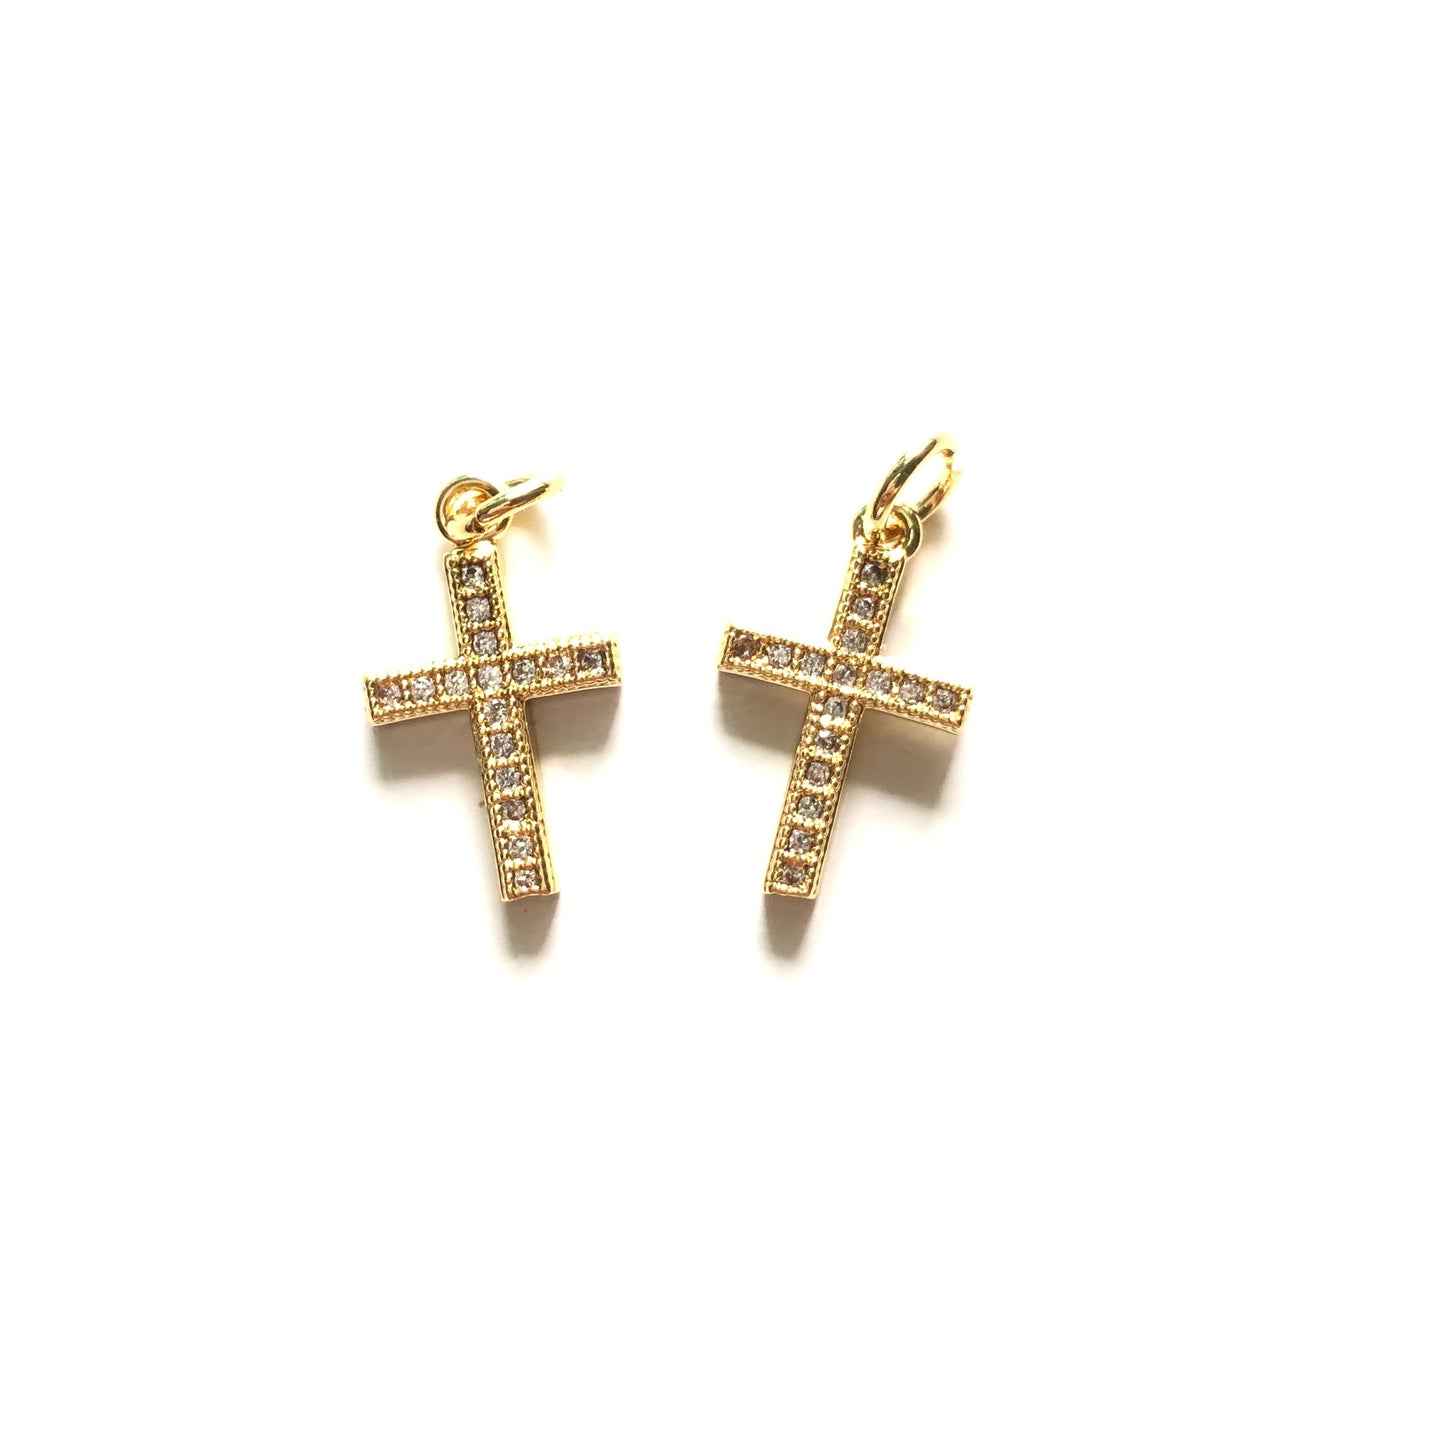 10pcs/lot 14.3*10mm CZ Paved Cross Charms Gold CZ Paved Charms Crosses Small Sizes Charms Beads Beyond